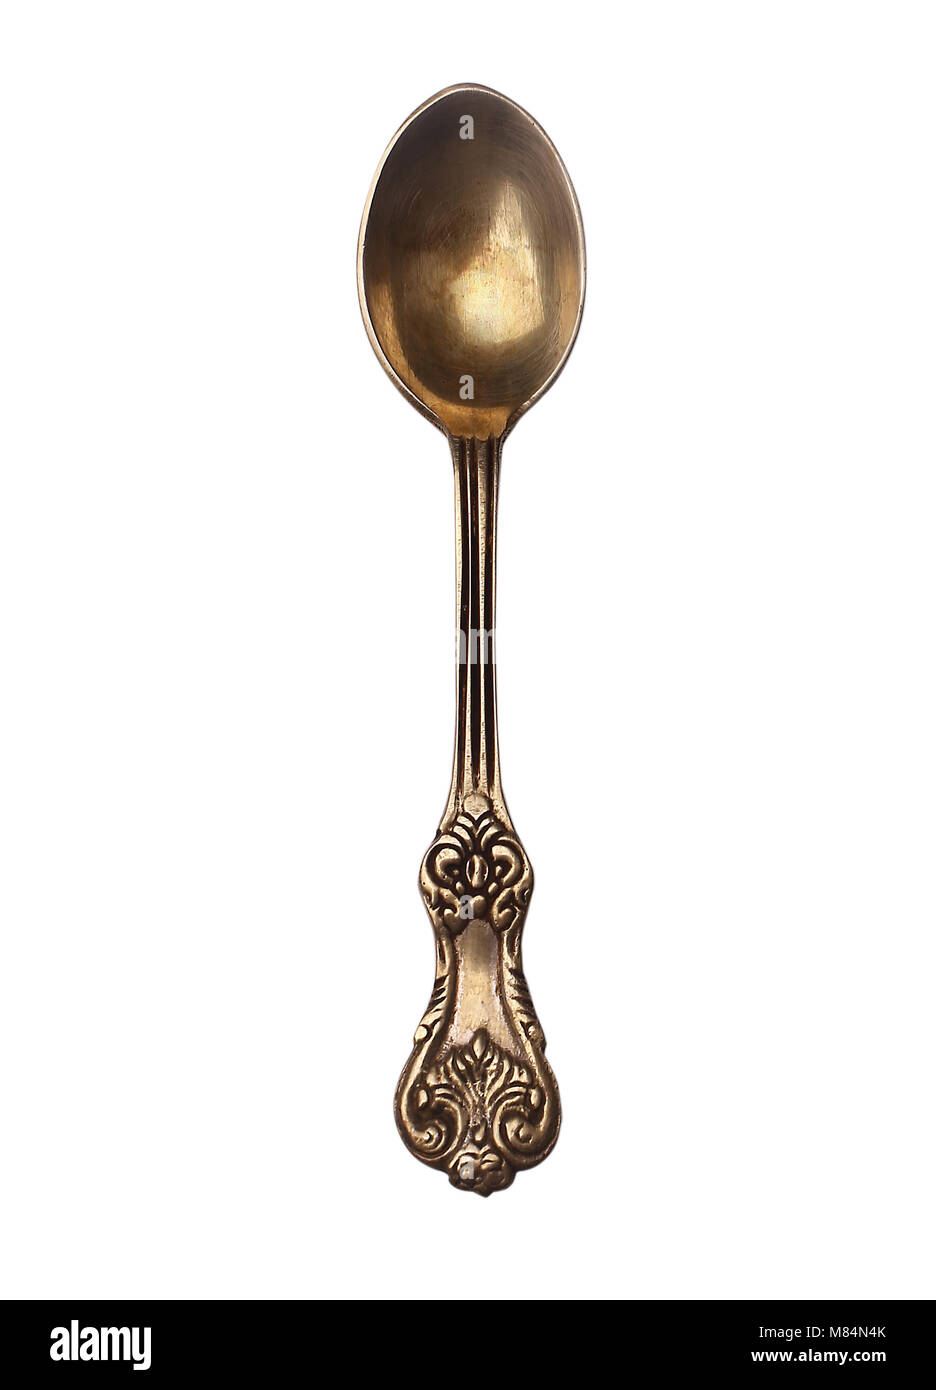 Goods for the kitchen, goods for the restaurant, a teaspoon, gold, metal, vintage, old, object, sweet, kitchen, yellow, golden Stock Photo